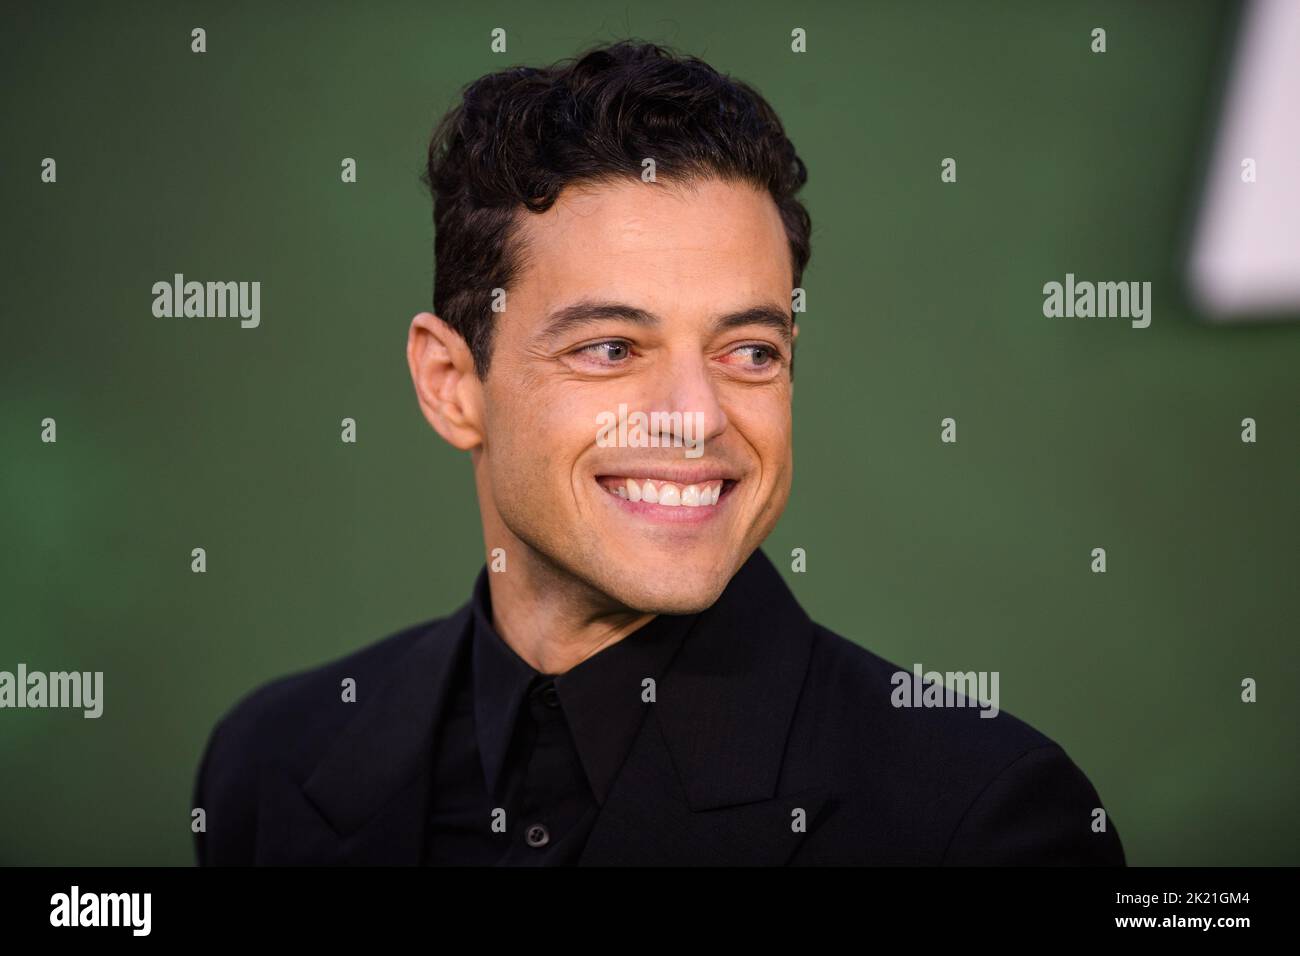 London, UK. 21 September 2022. Rami Malek attending the European premiere of Amsterdam at the Odeon Luxe Leicester Square Cinema, London Picture date: Thursday September 21, 2022. Photo credit should read: Matt Crossick/Empics/Alamy Live News Stock Photo